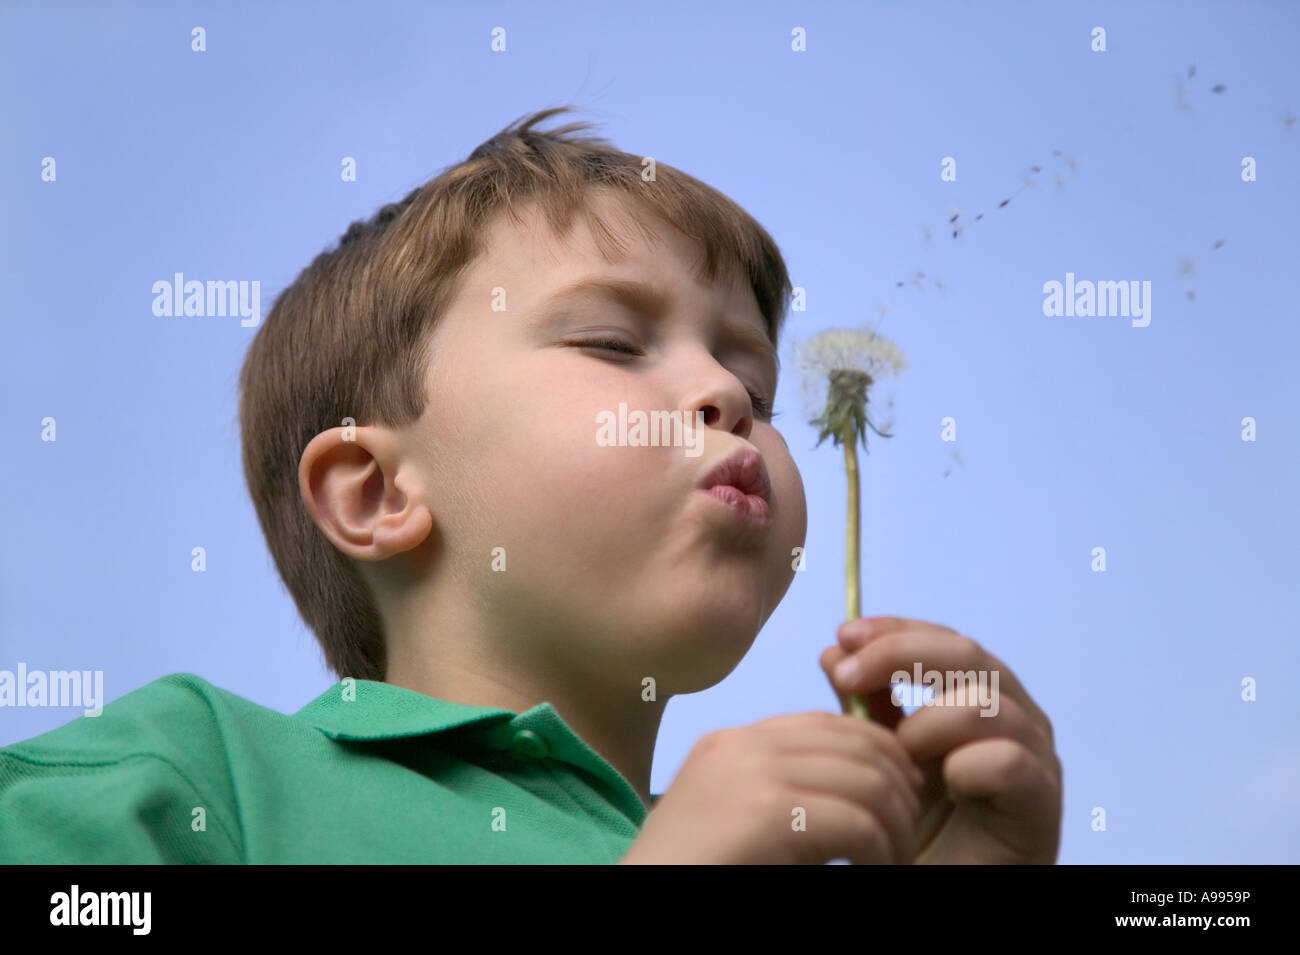 Boy blowing the seeds from a dandelion head Stock Photo